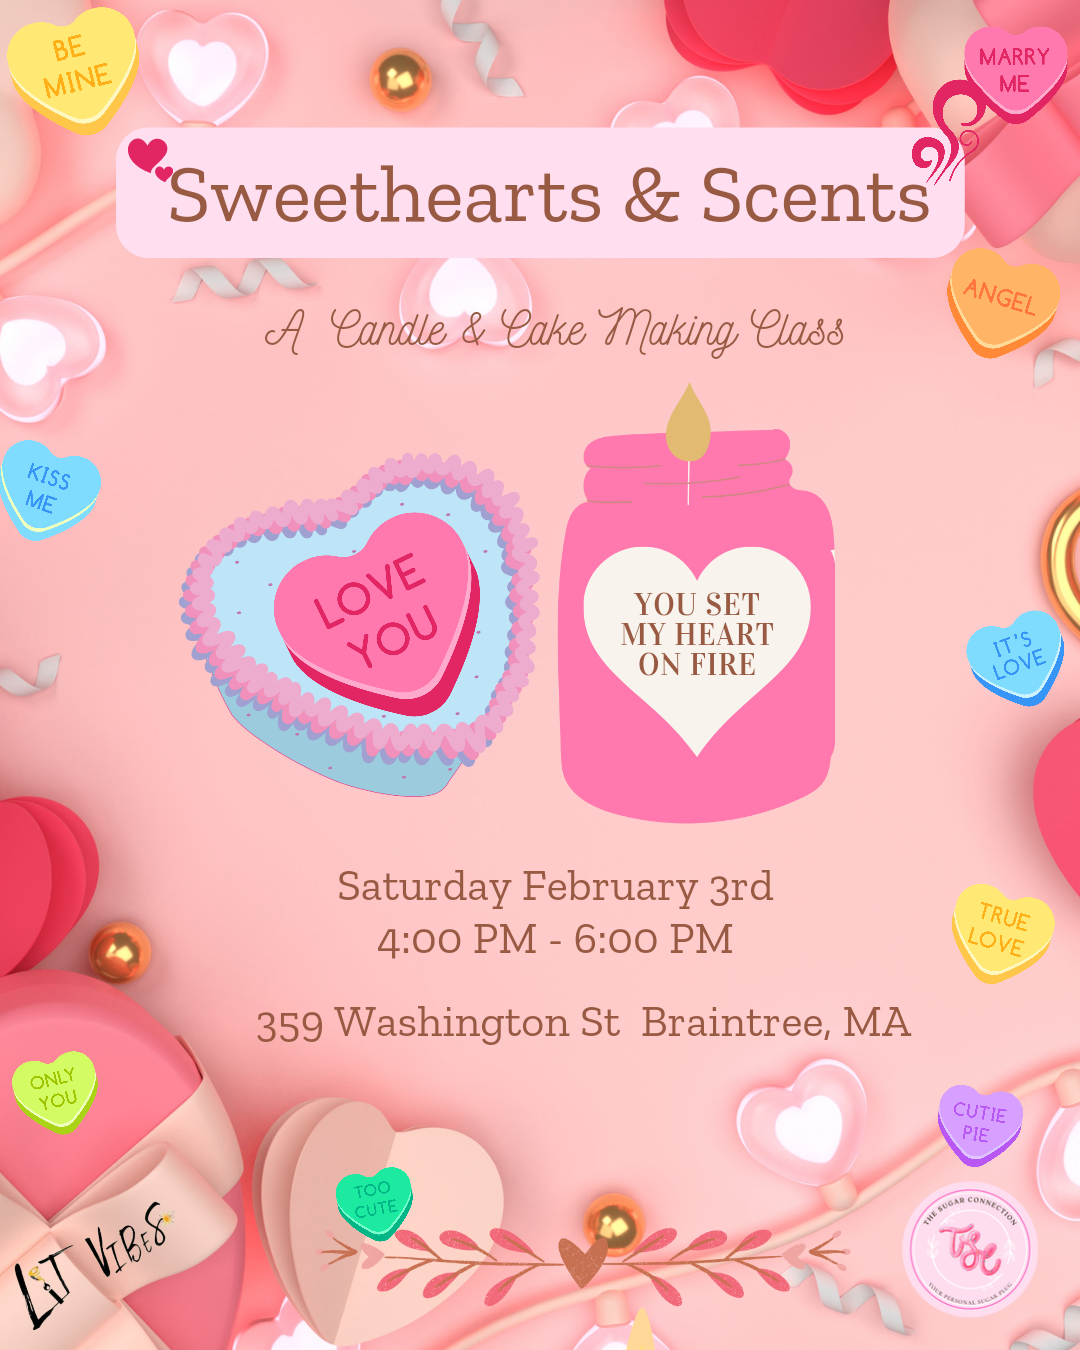 Sweethearts & Scents